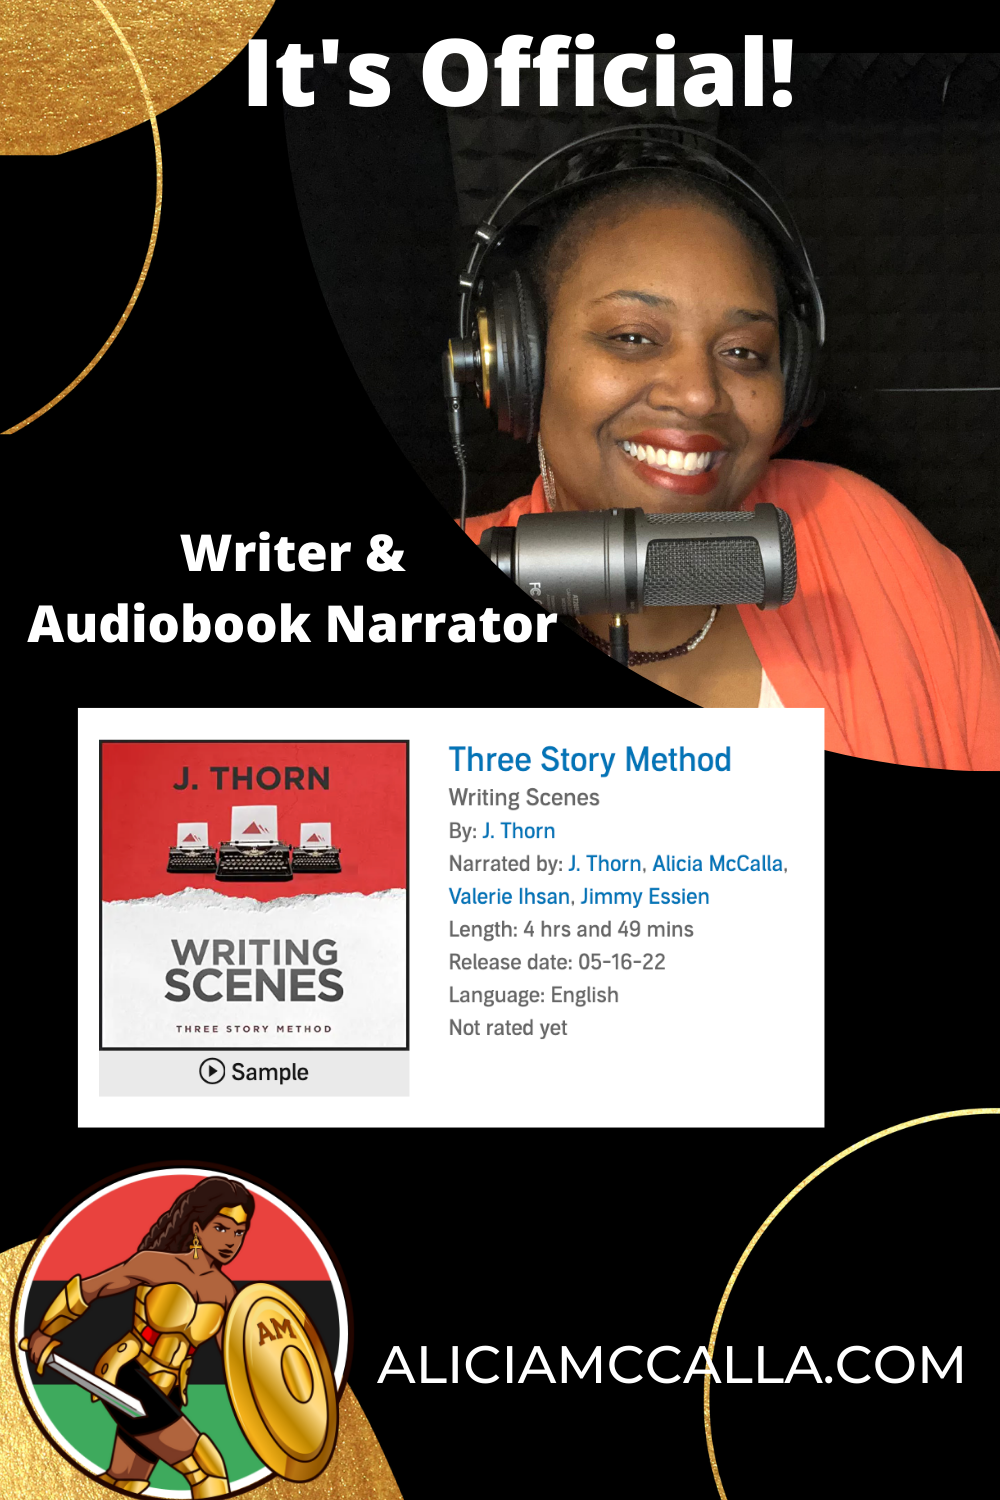 it's Official: I'm a writer & Audiobook narrator!